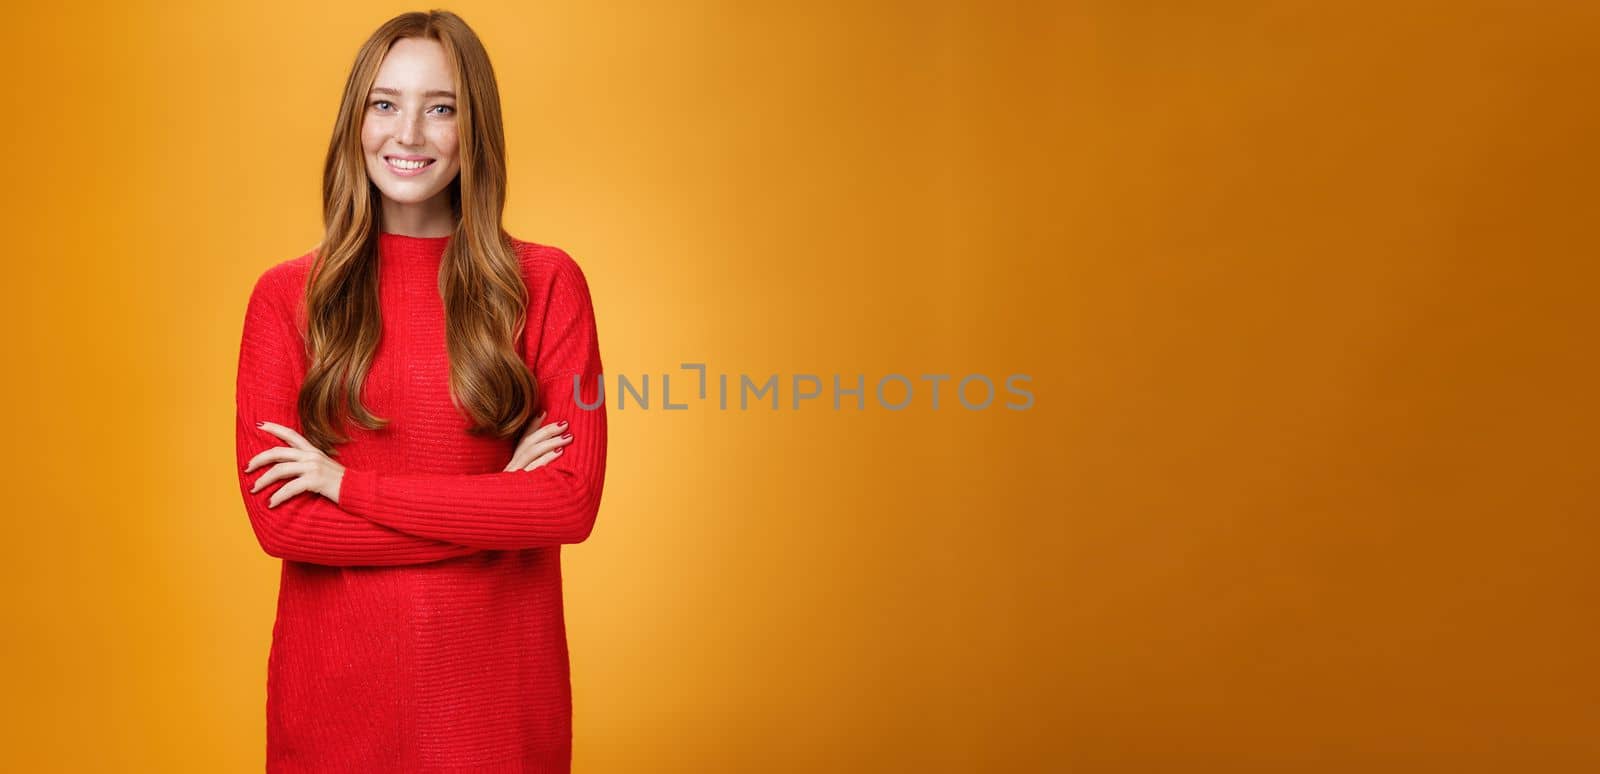 Portrait of elegant and friendly, polite redhead female in red knitted dress holding hands crossed over body in confident and relaxed pose smiling satisfied offering help over orange background.